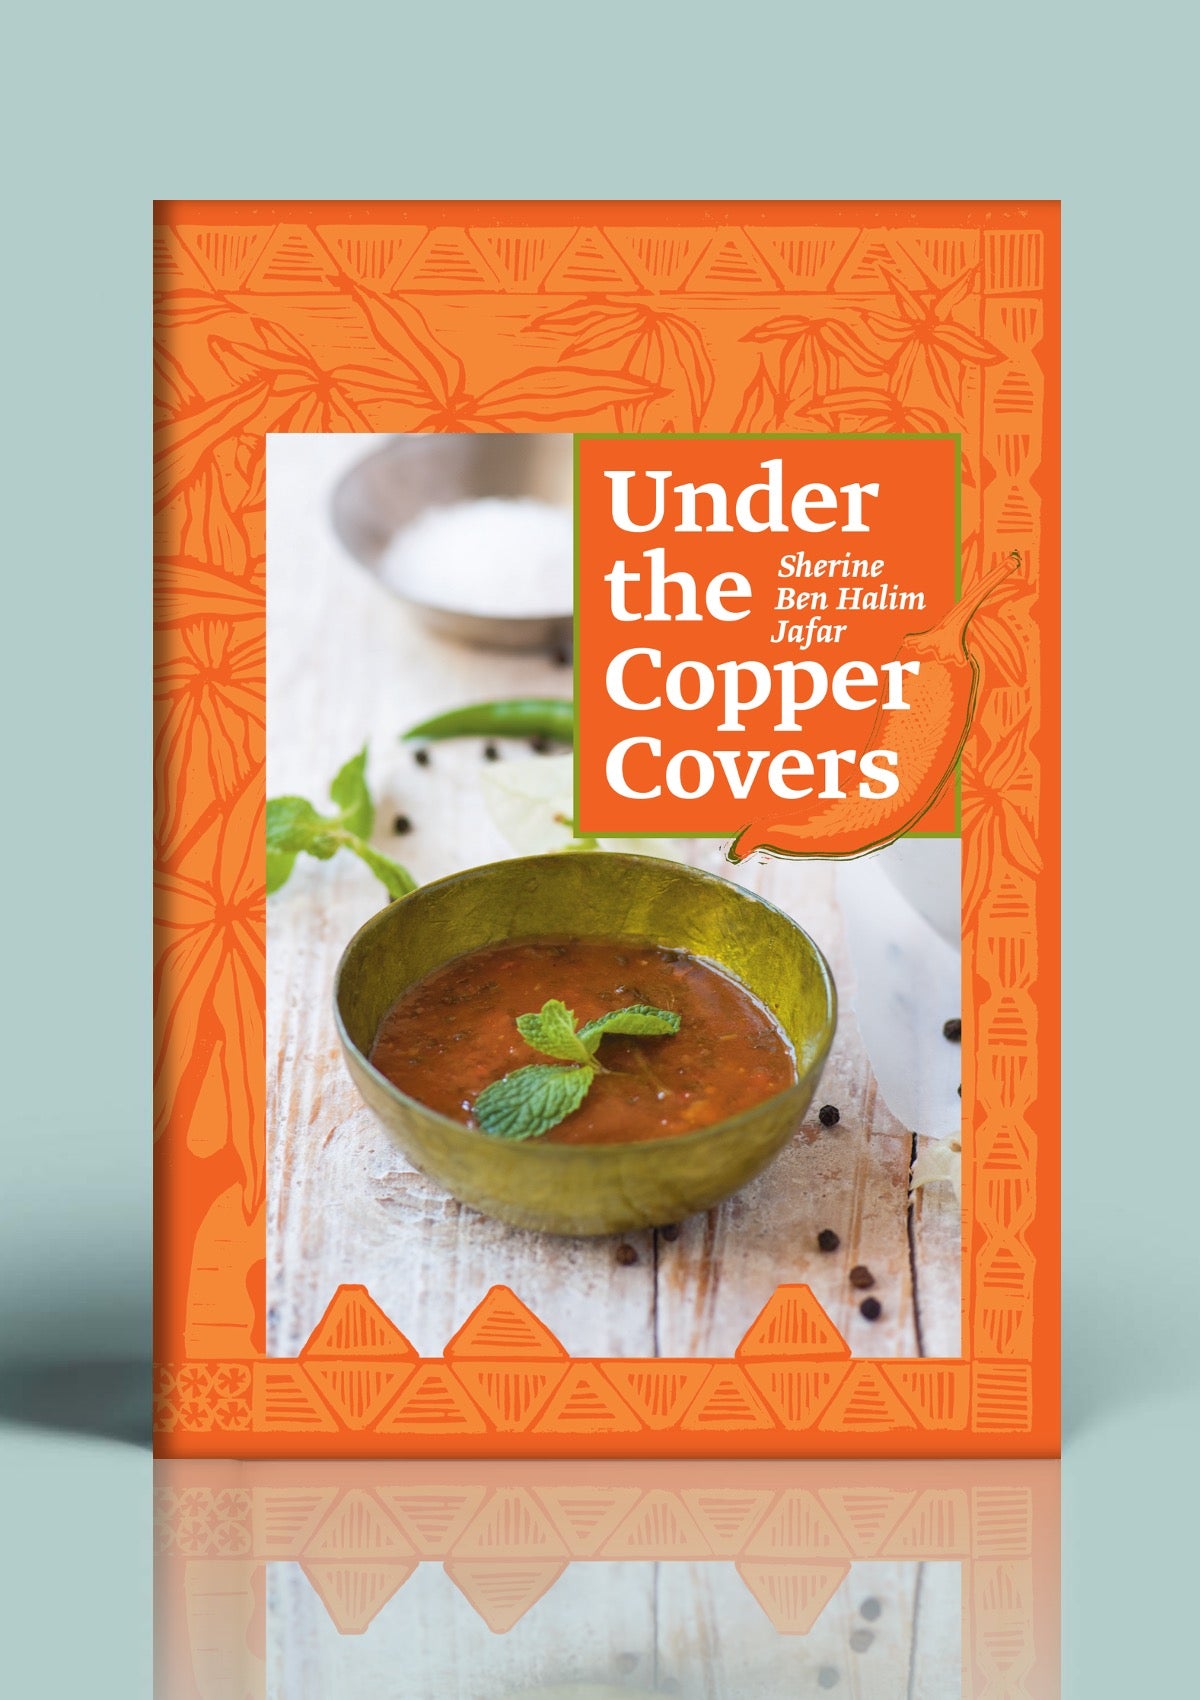 Under the Copper Covers